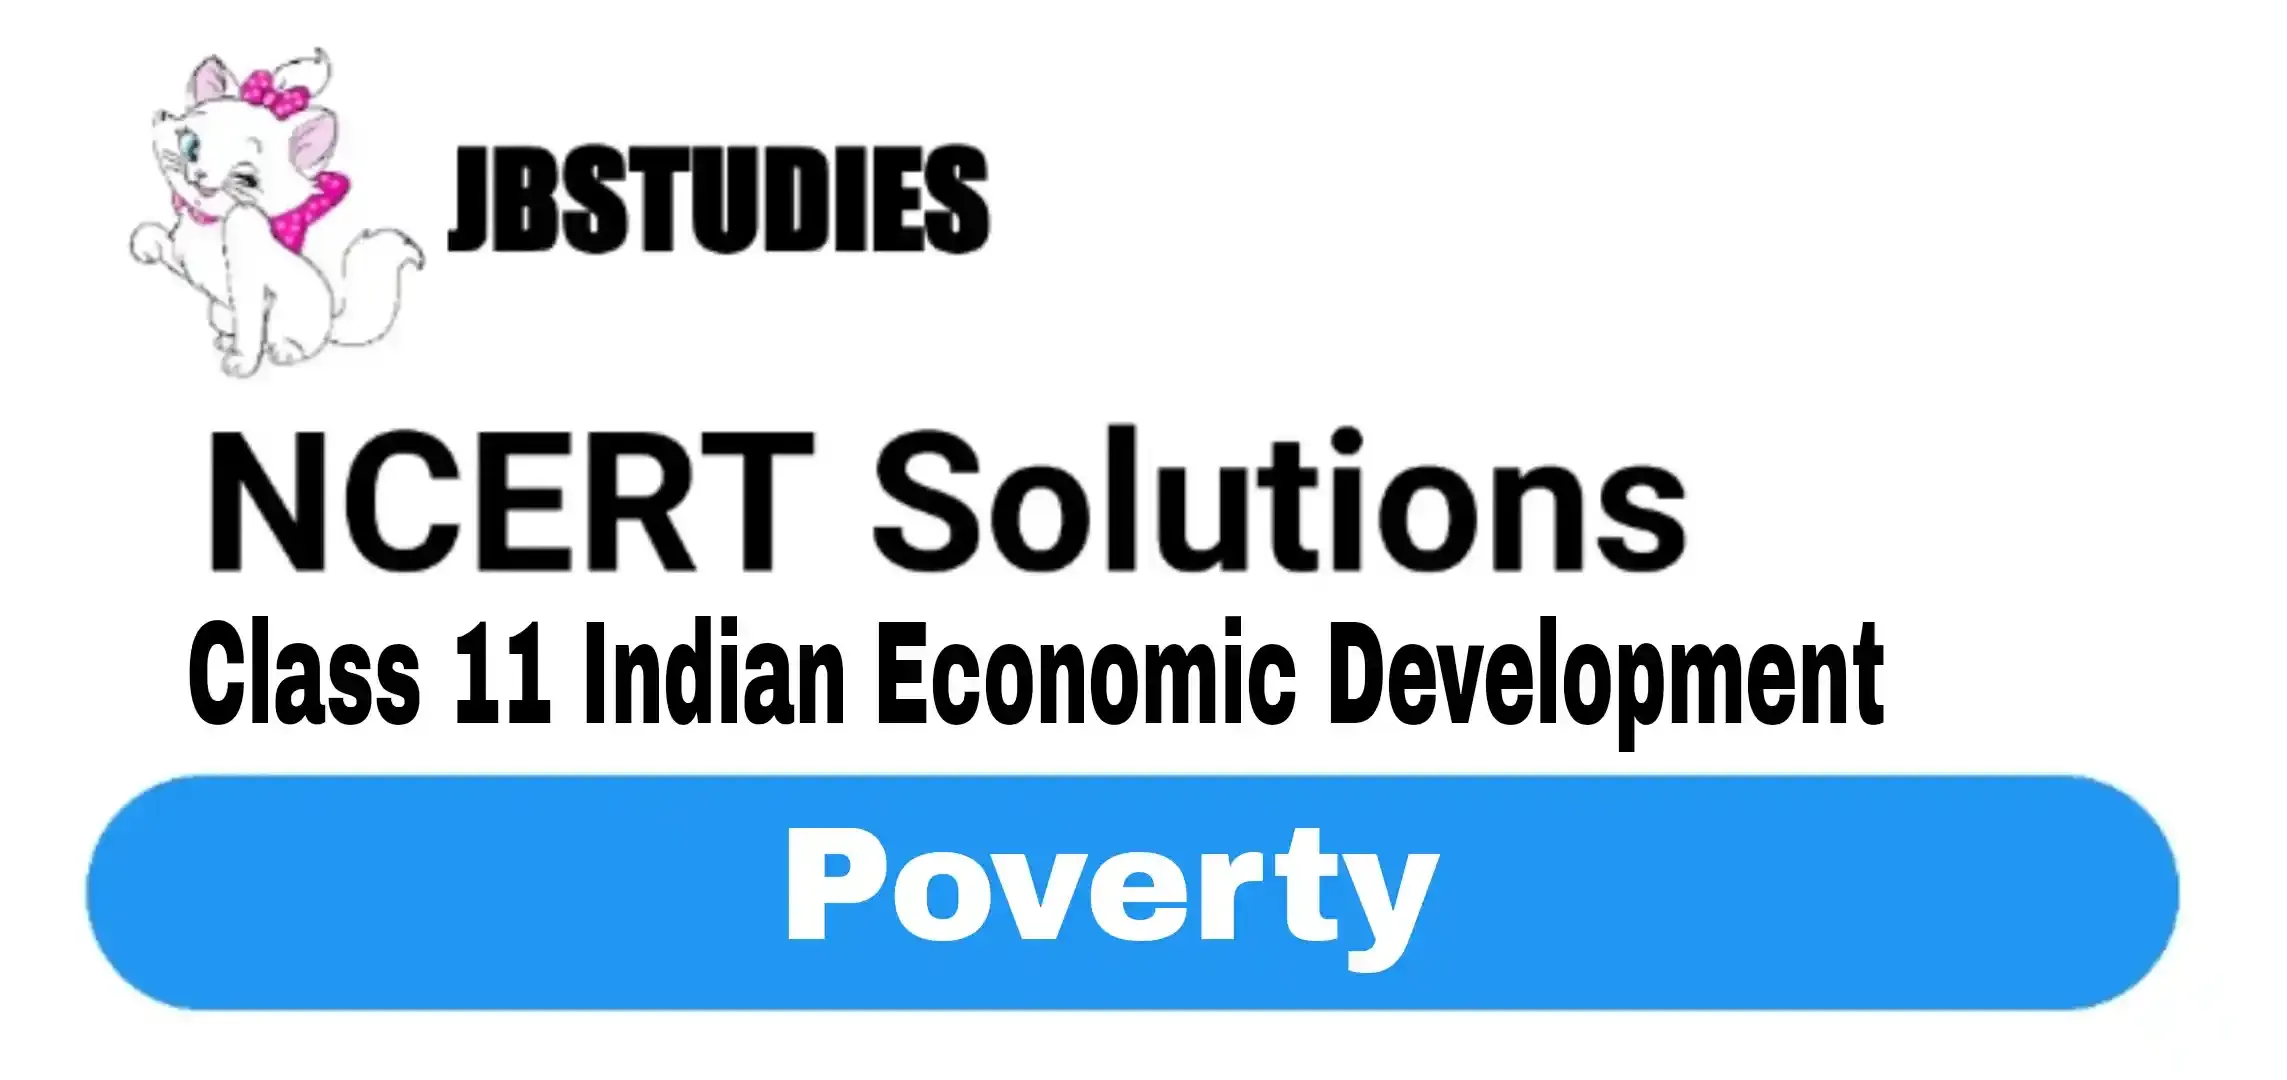 Solutions Class 11 Indian Economic Development Chapter -4 (Poverty)